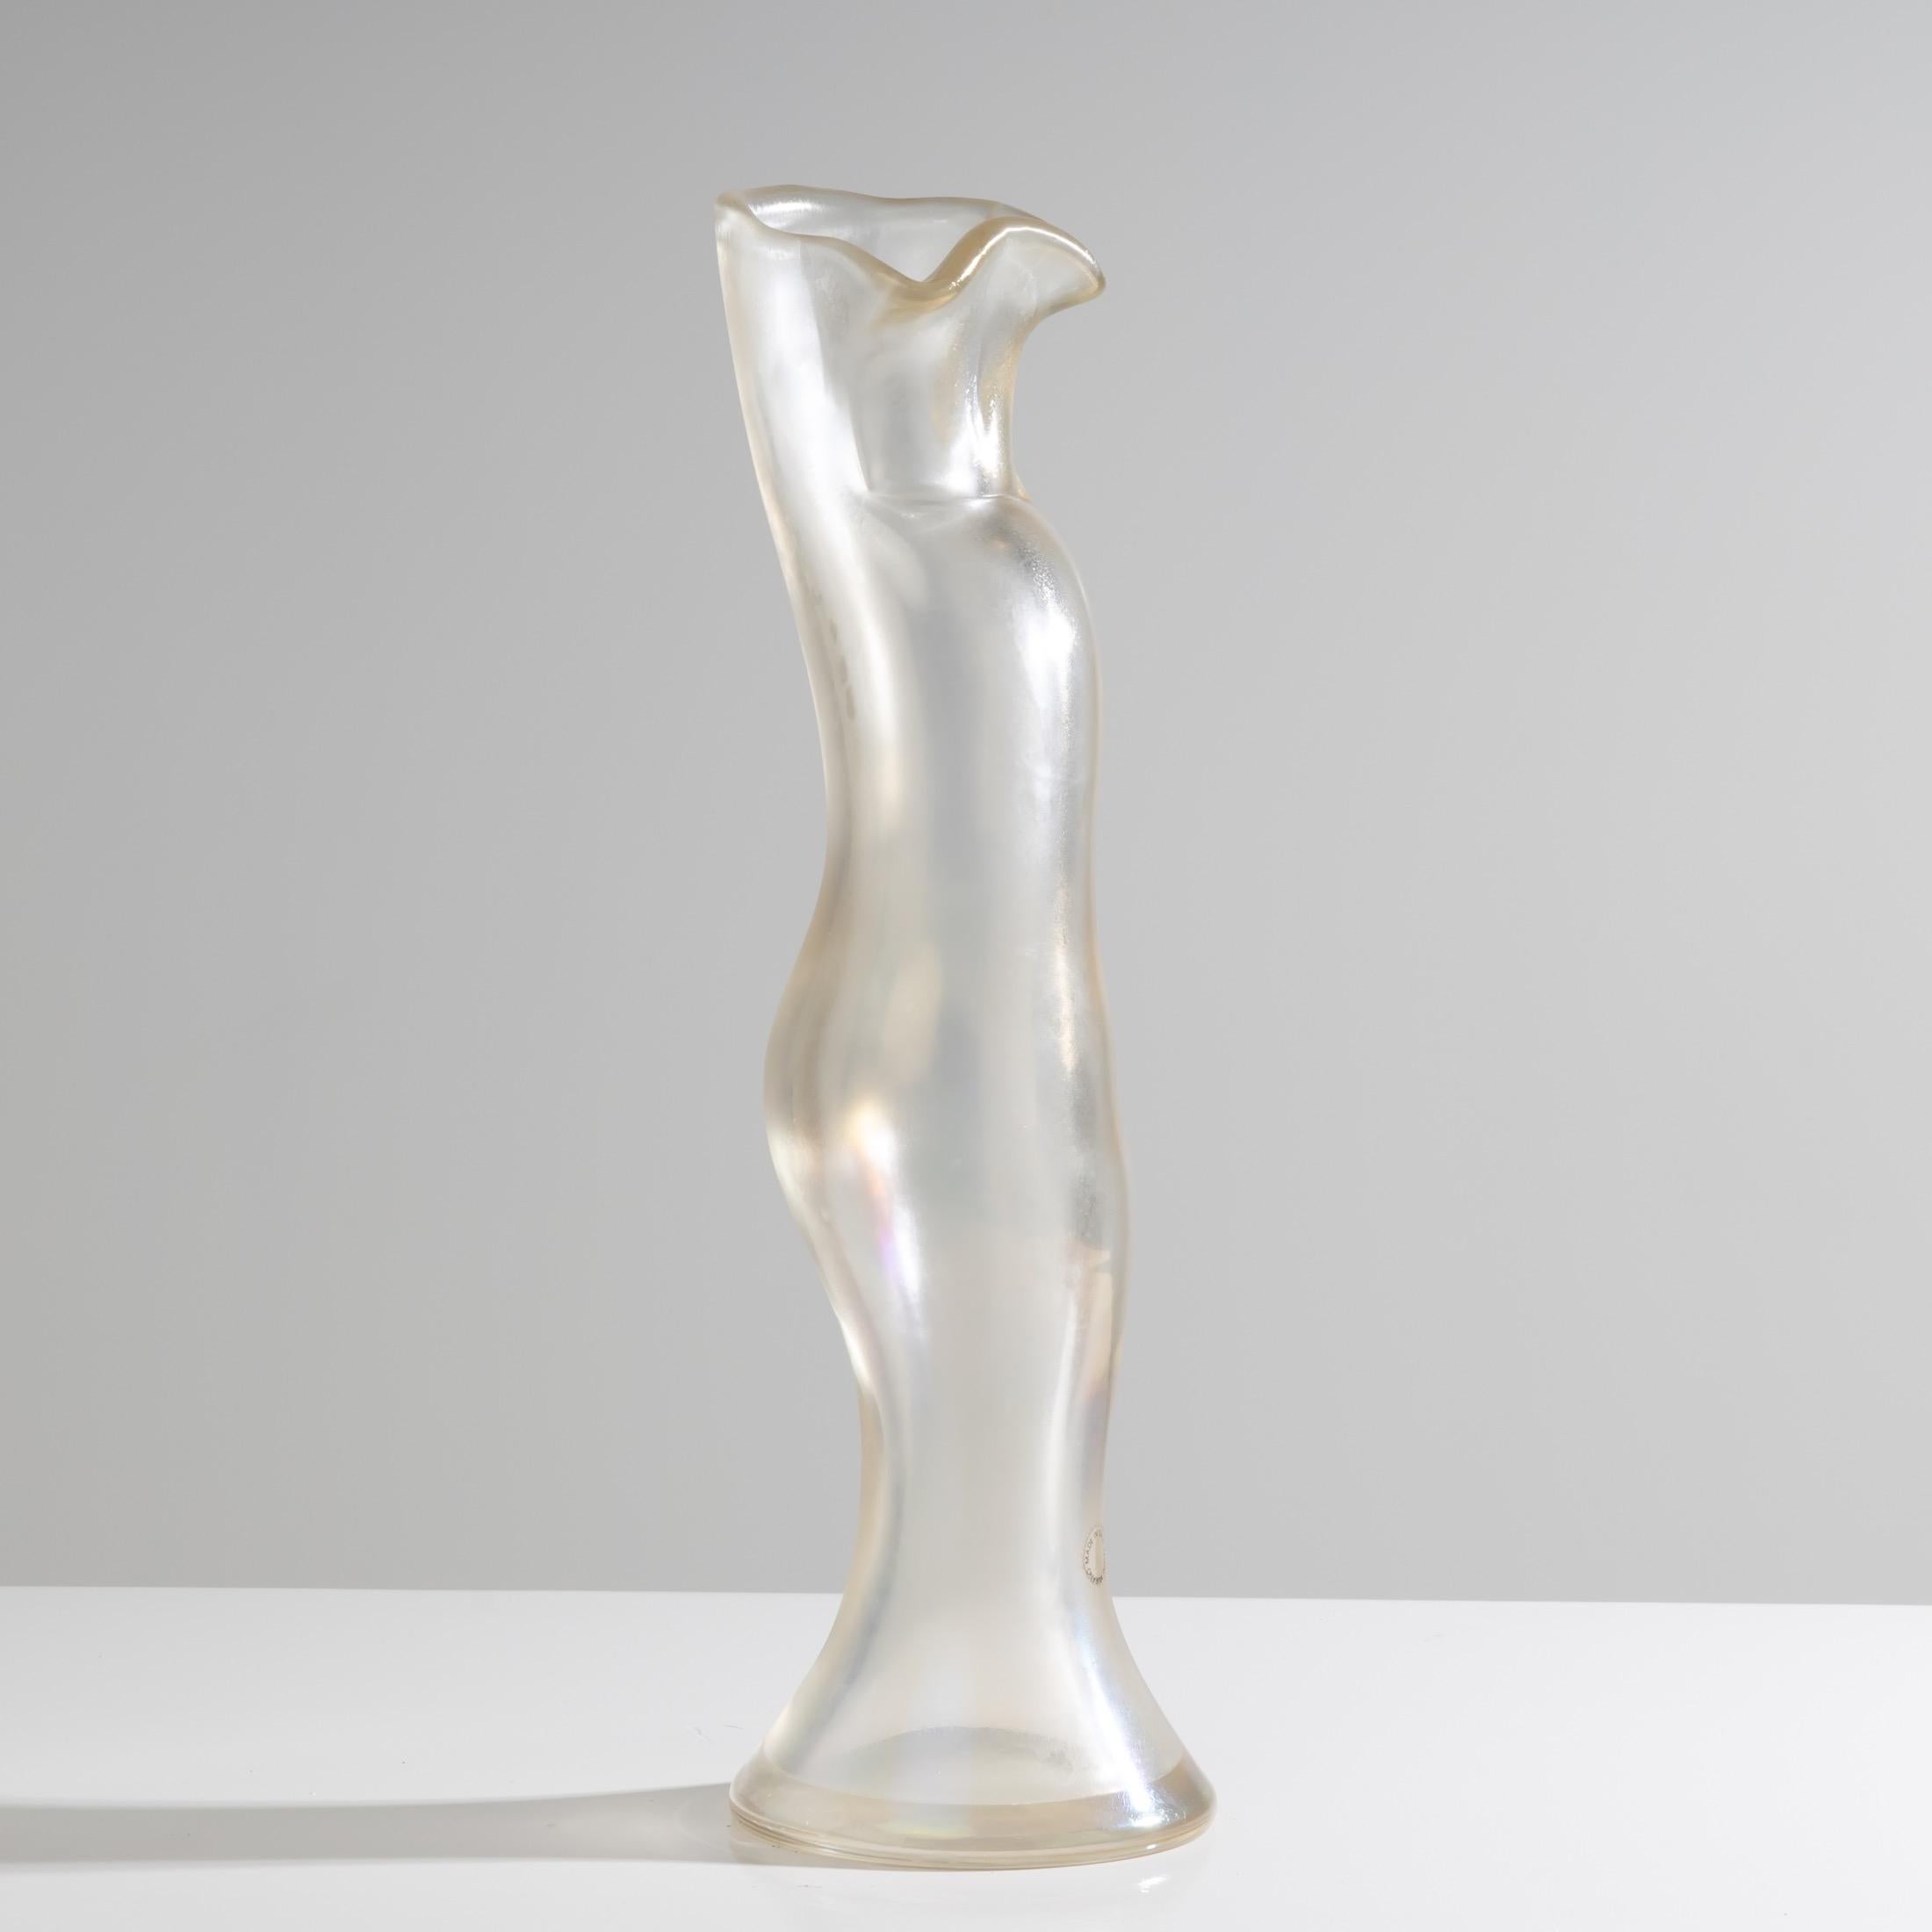 The body of the vase in transparent iridescent glass on the entire exterior.
Of female form, recurring in the work of the artist, this vase is part of the last series of objects designed by Fulvio Bianconi for Venini.
Signed and dated with the